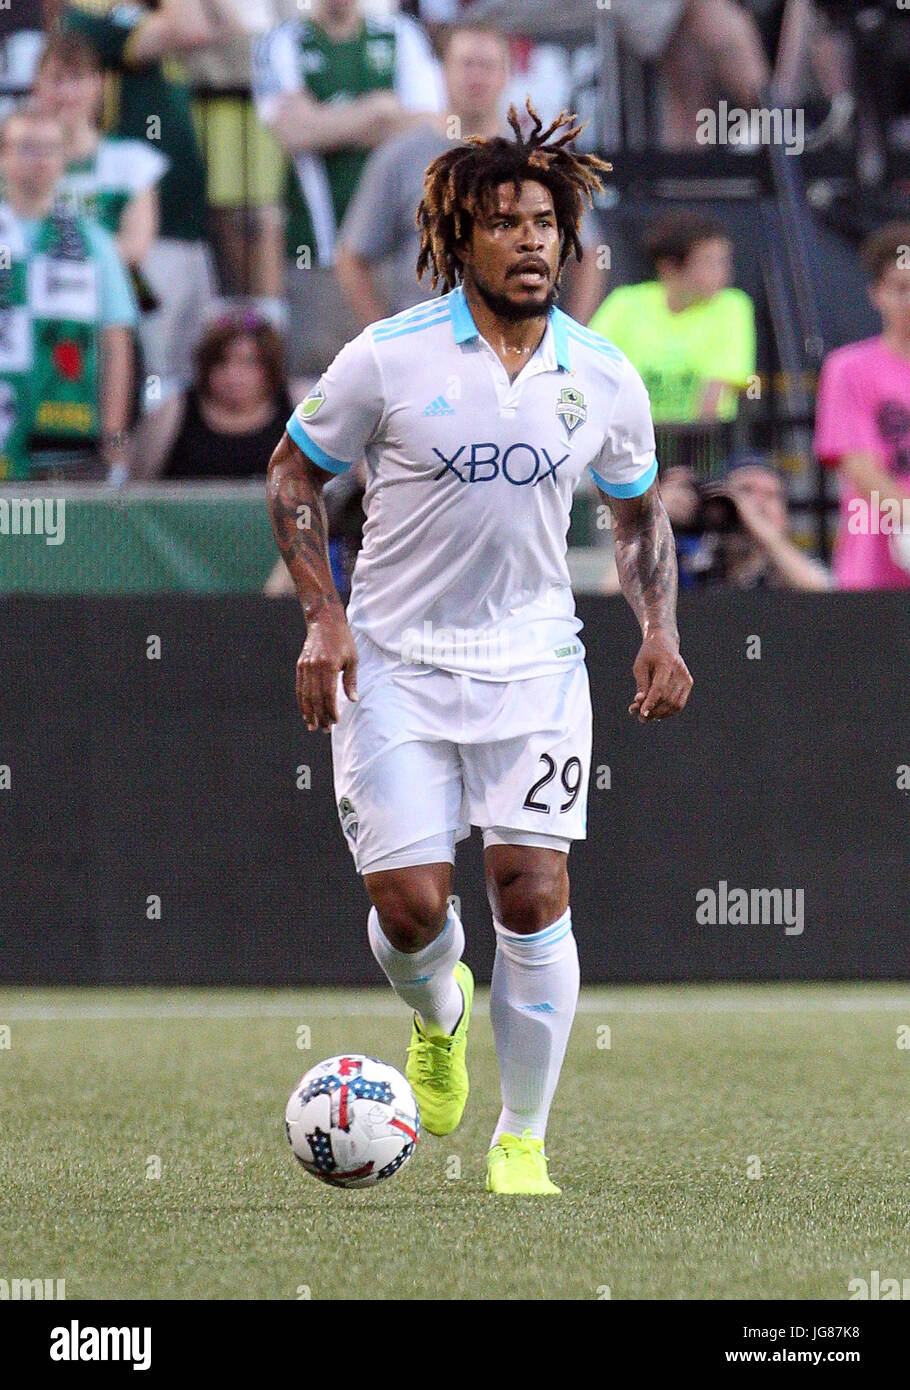 June 25, 2017. Seattle Sounders defender Roman Torres (29) during the MLS match between the visiting Seattle Sounders and the Portland Timbers at Providence Park, Portland, OR. Larry C. Lawson/CSM Stock Photo